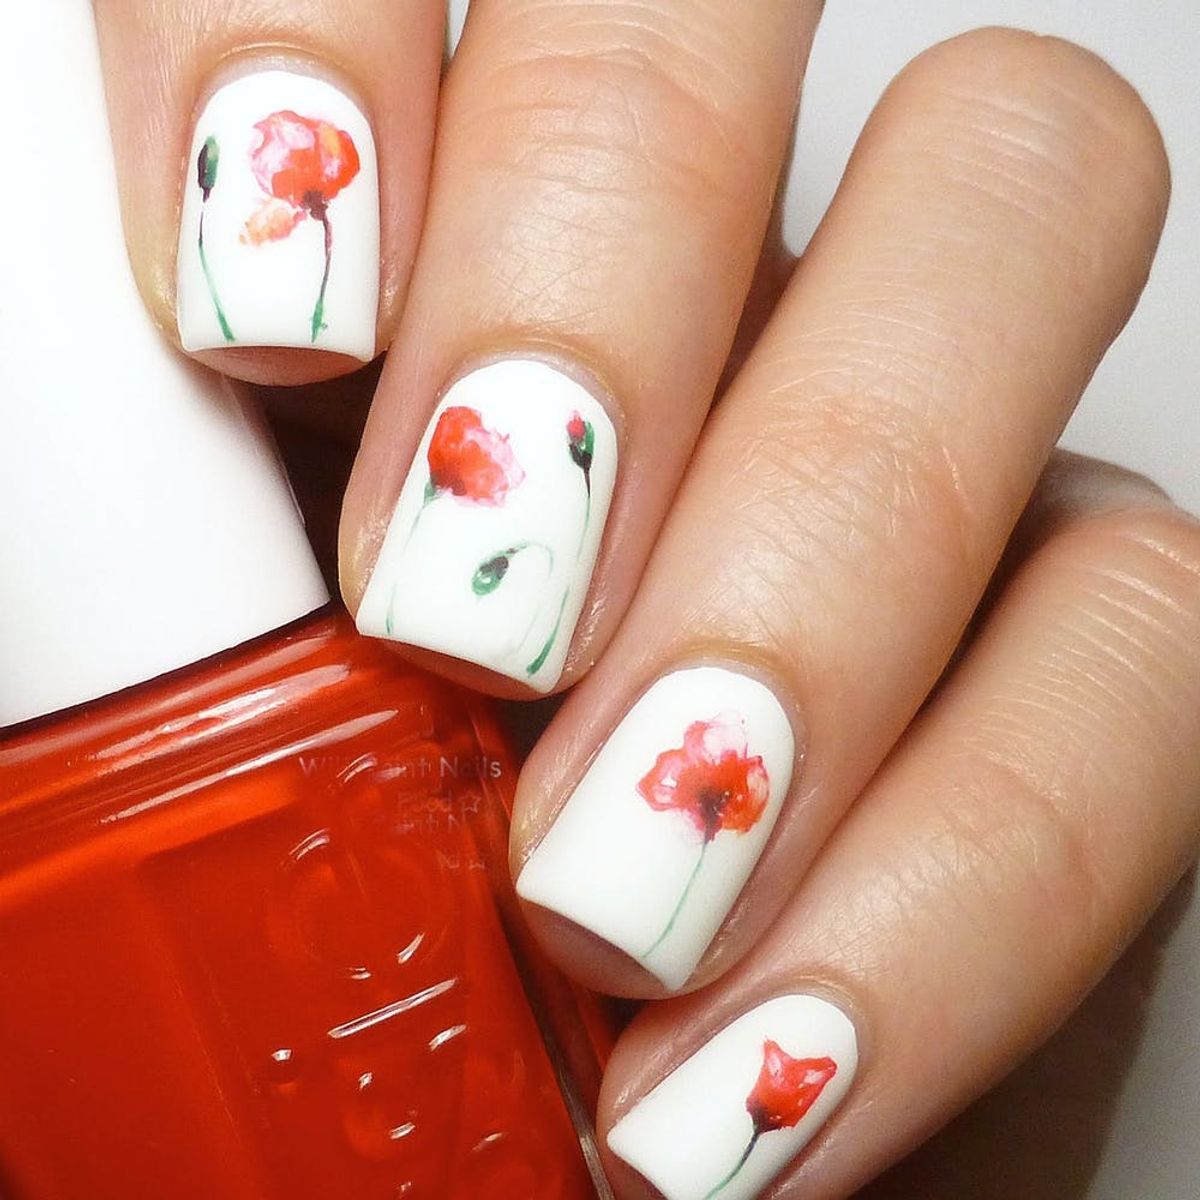 10 Floral Manicures You Need to Master for Spring